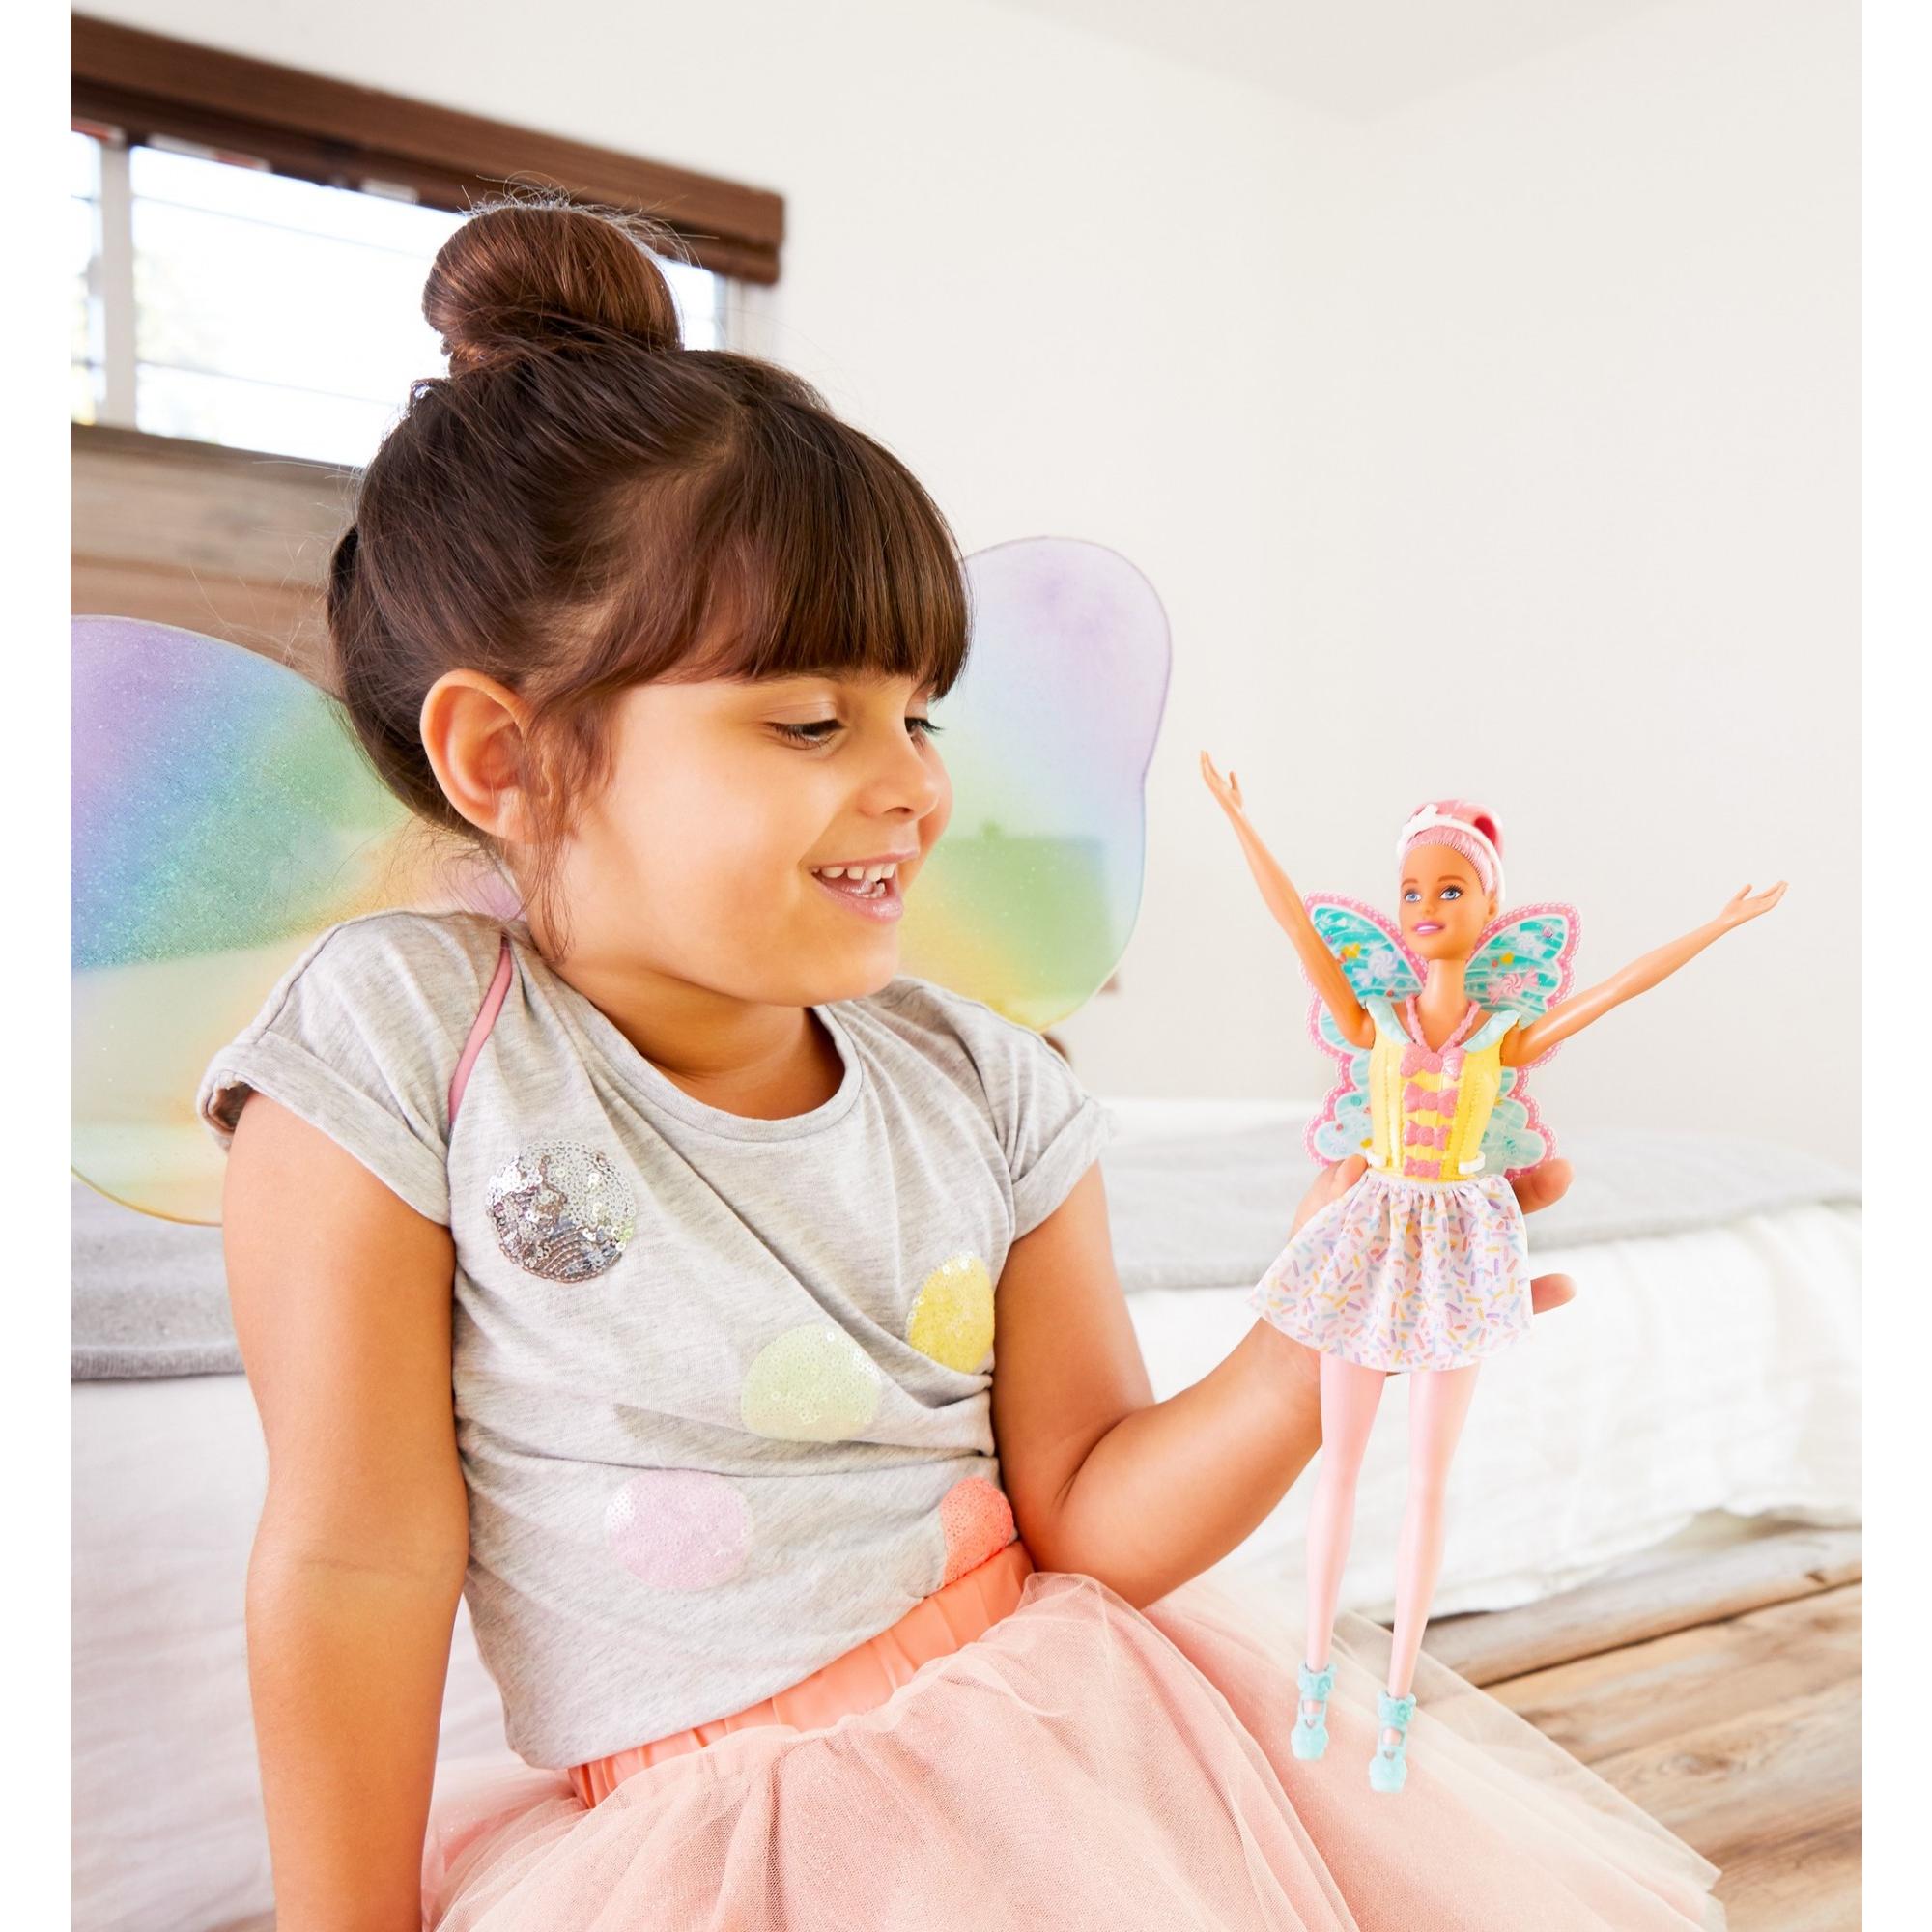 Barbie Dreamtopia Fairy Doll, Pink Hair & Candy-Decorated Wings - image 2 of 8